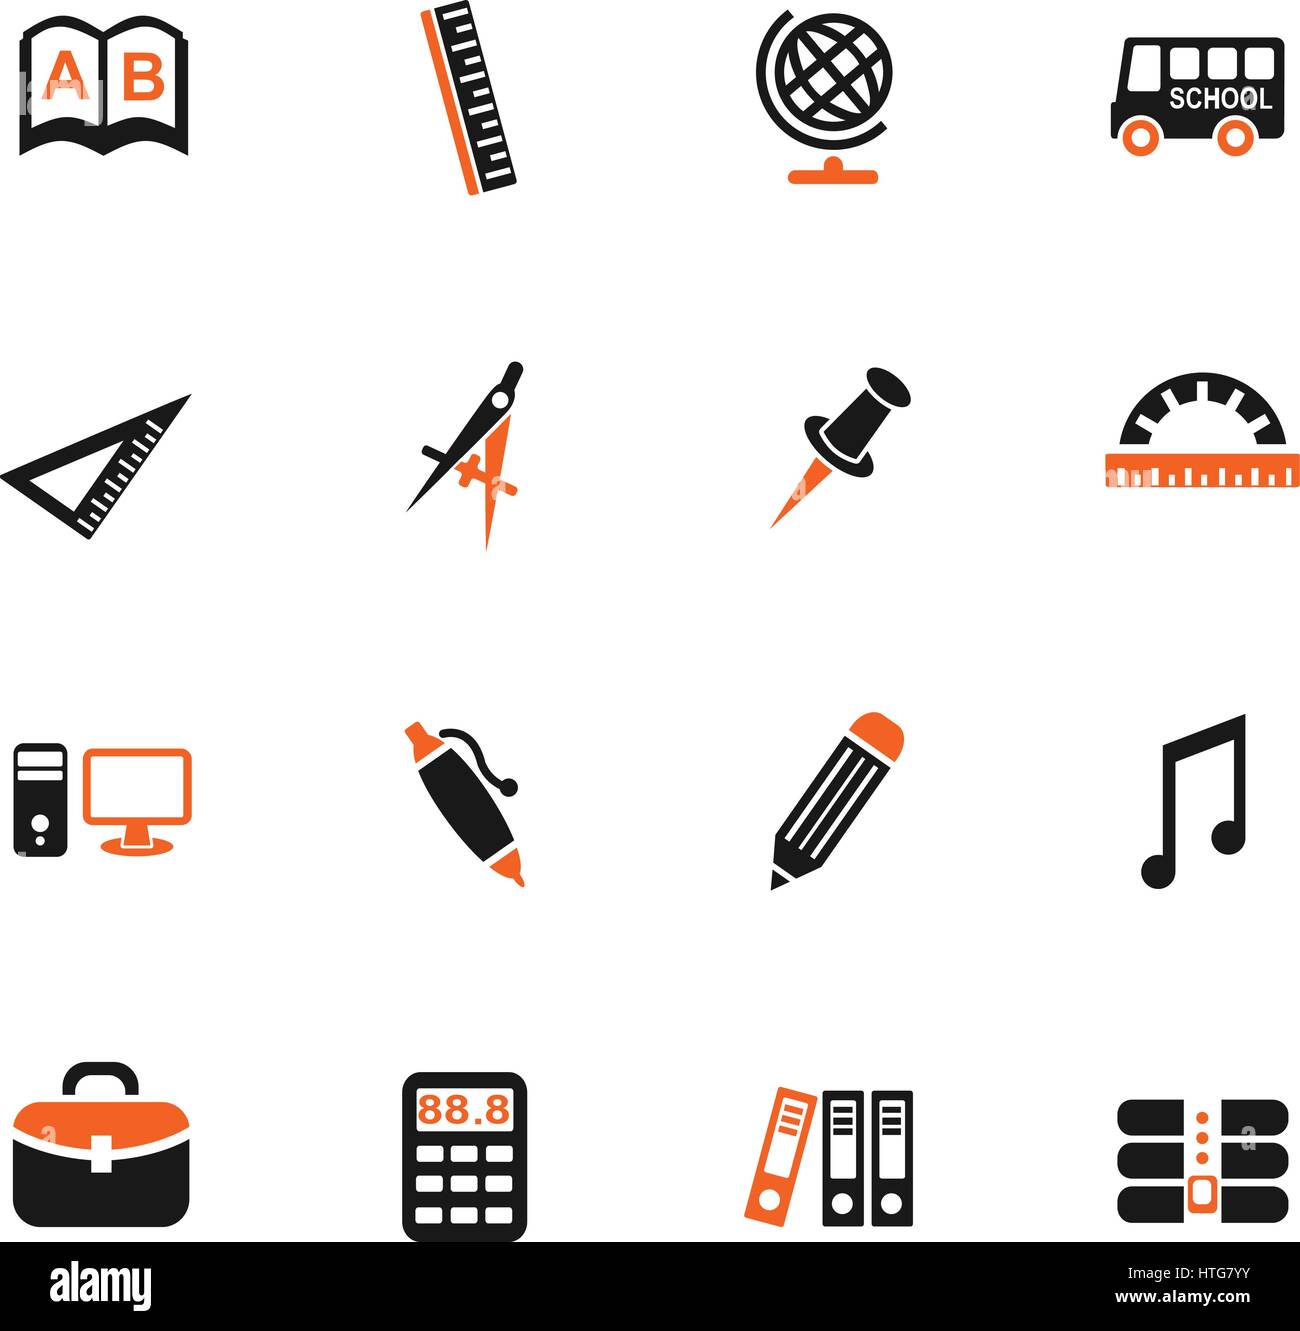 school web icons for user interface design Stock Vector